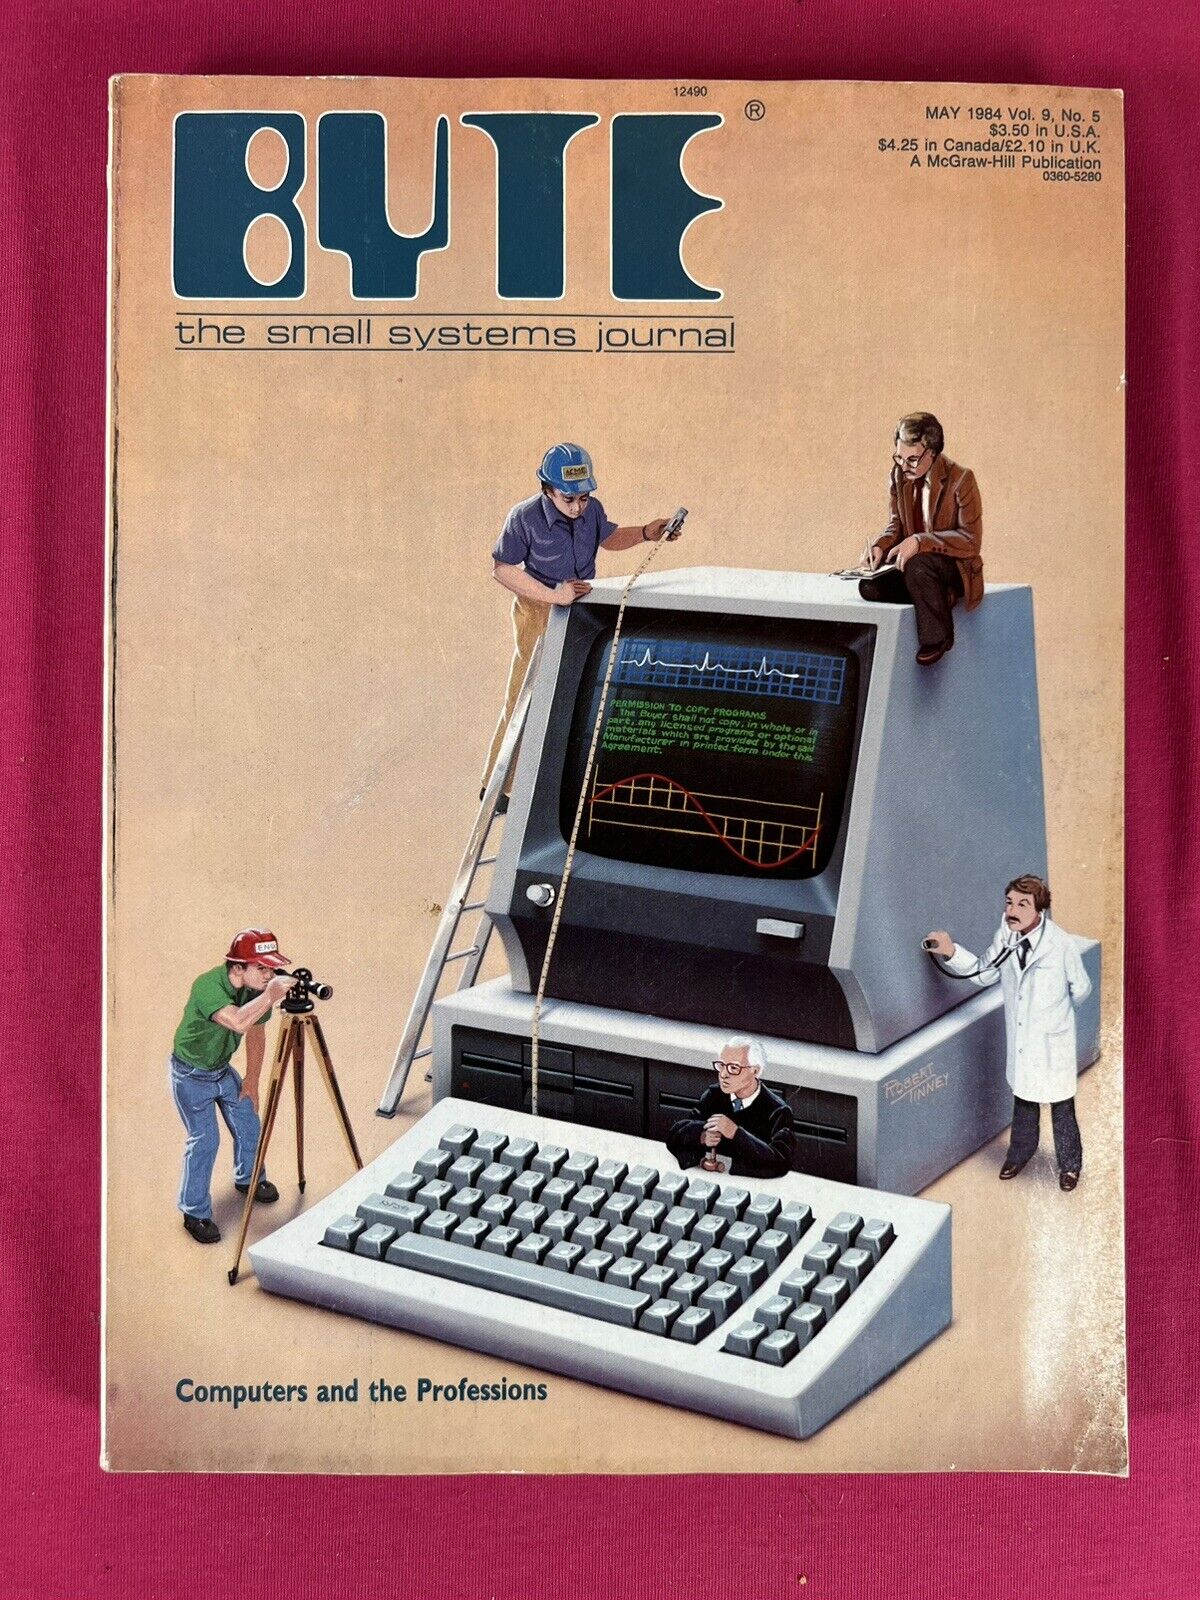 MAY 1984 BYTE MAGAZINE v9 #5 - COMPUTERS & PROFESSIONS Robert Tinney COVER VF